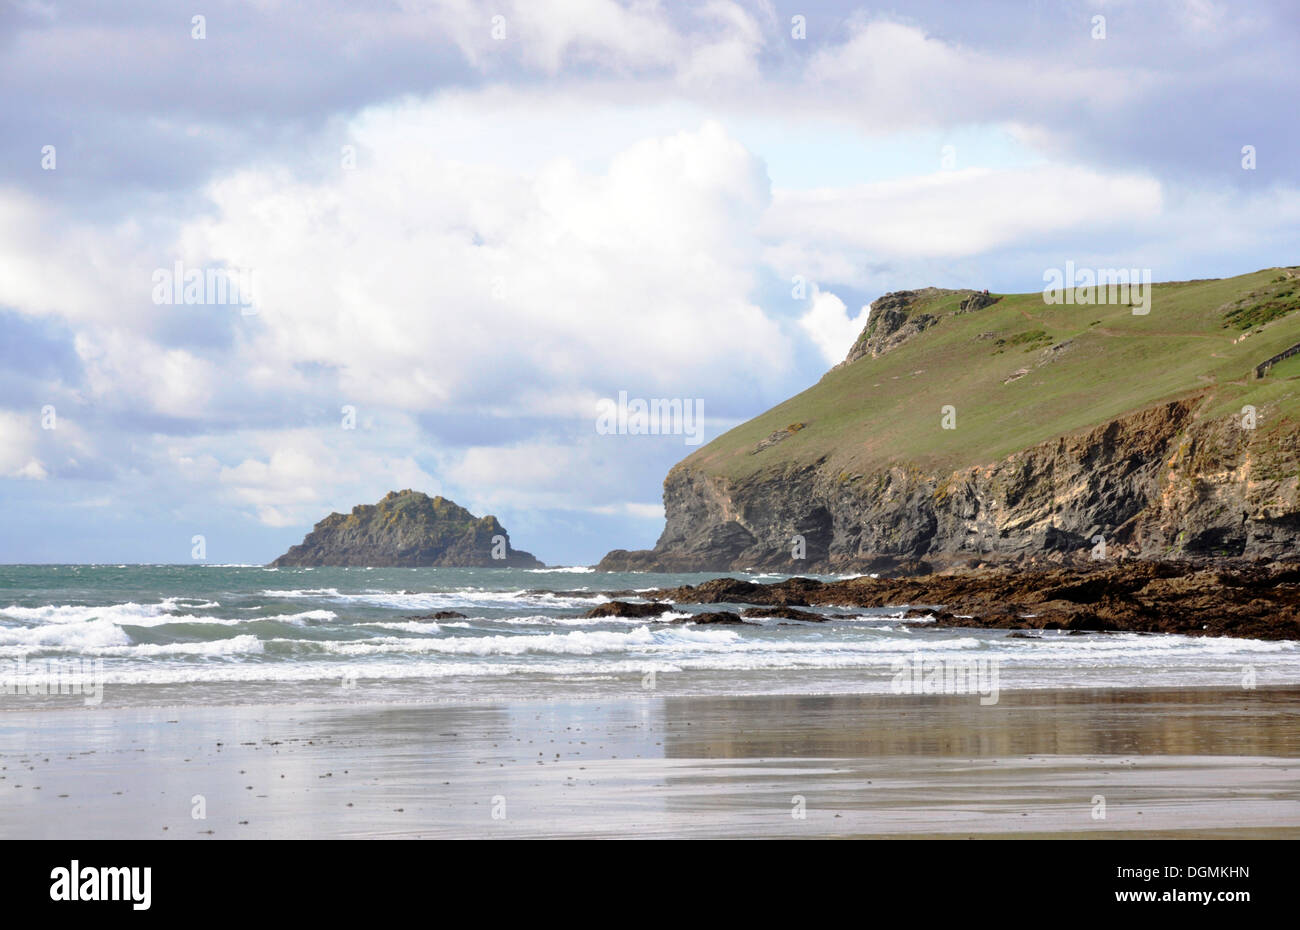 North Cornwall - Pentire Point - viewed from Polzeath beach - across breaking waves - steep cliffs - bright skyscape Stock Photo